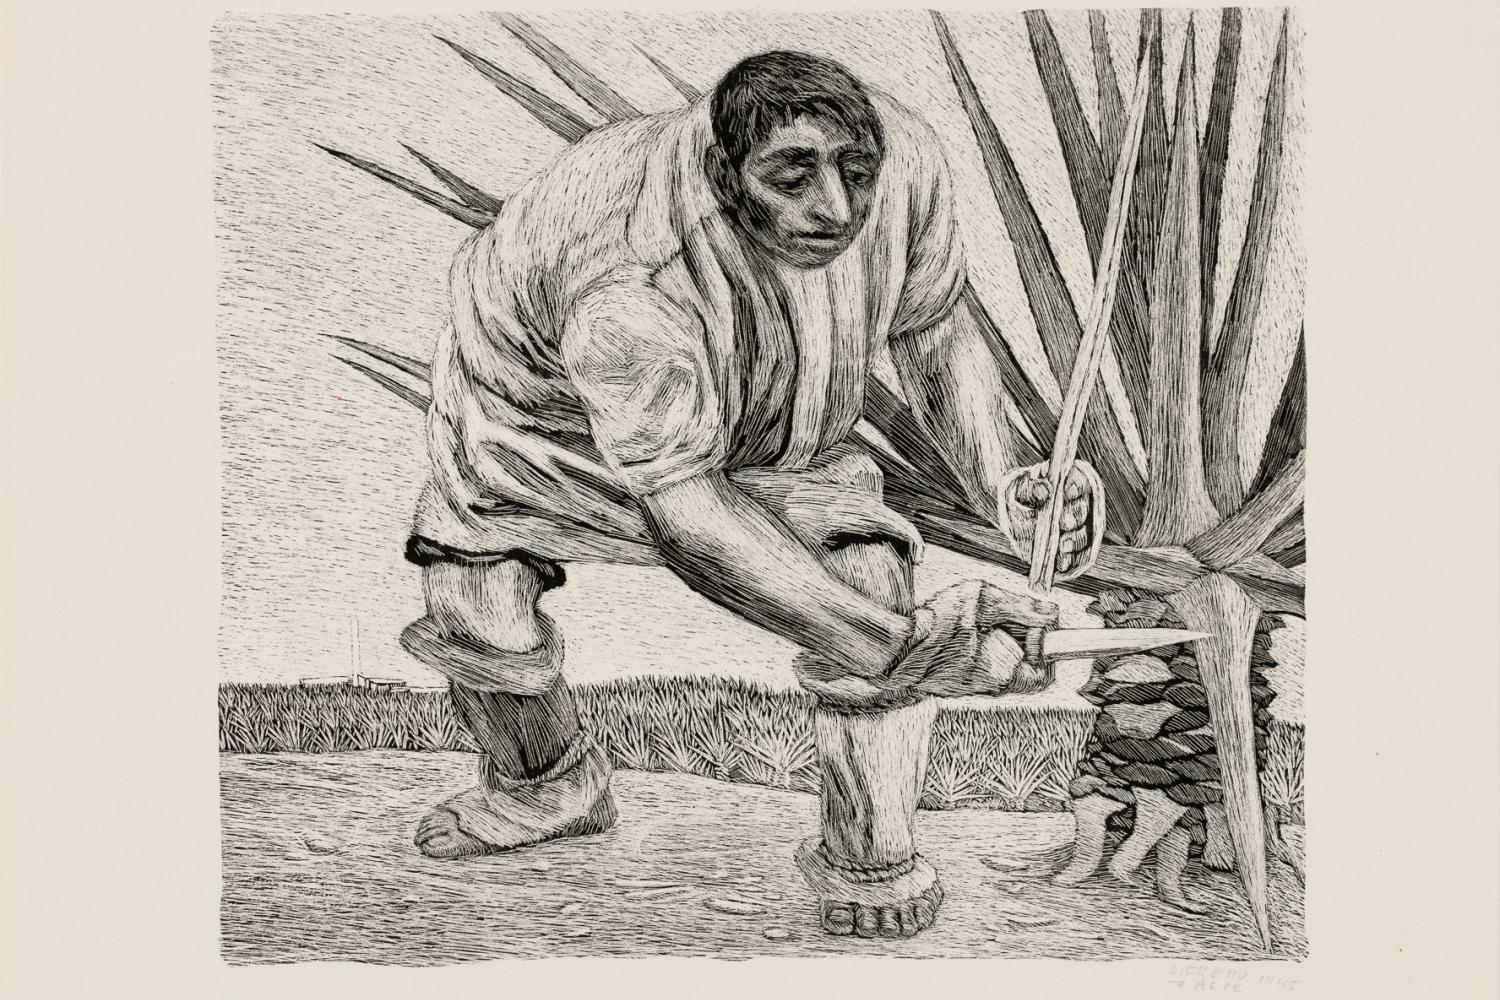 A black and white lithograph of a man crouched over and cutting a leaf off of a yucca plant with a knife.